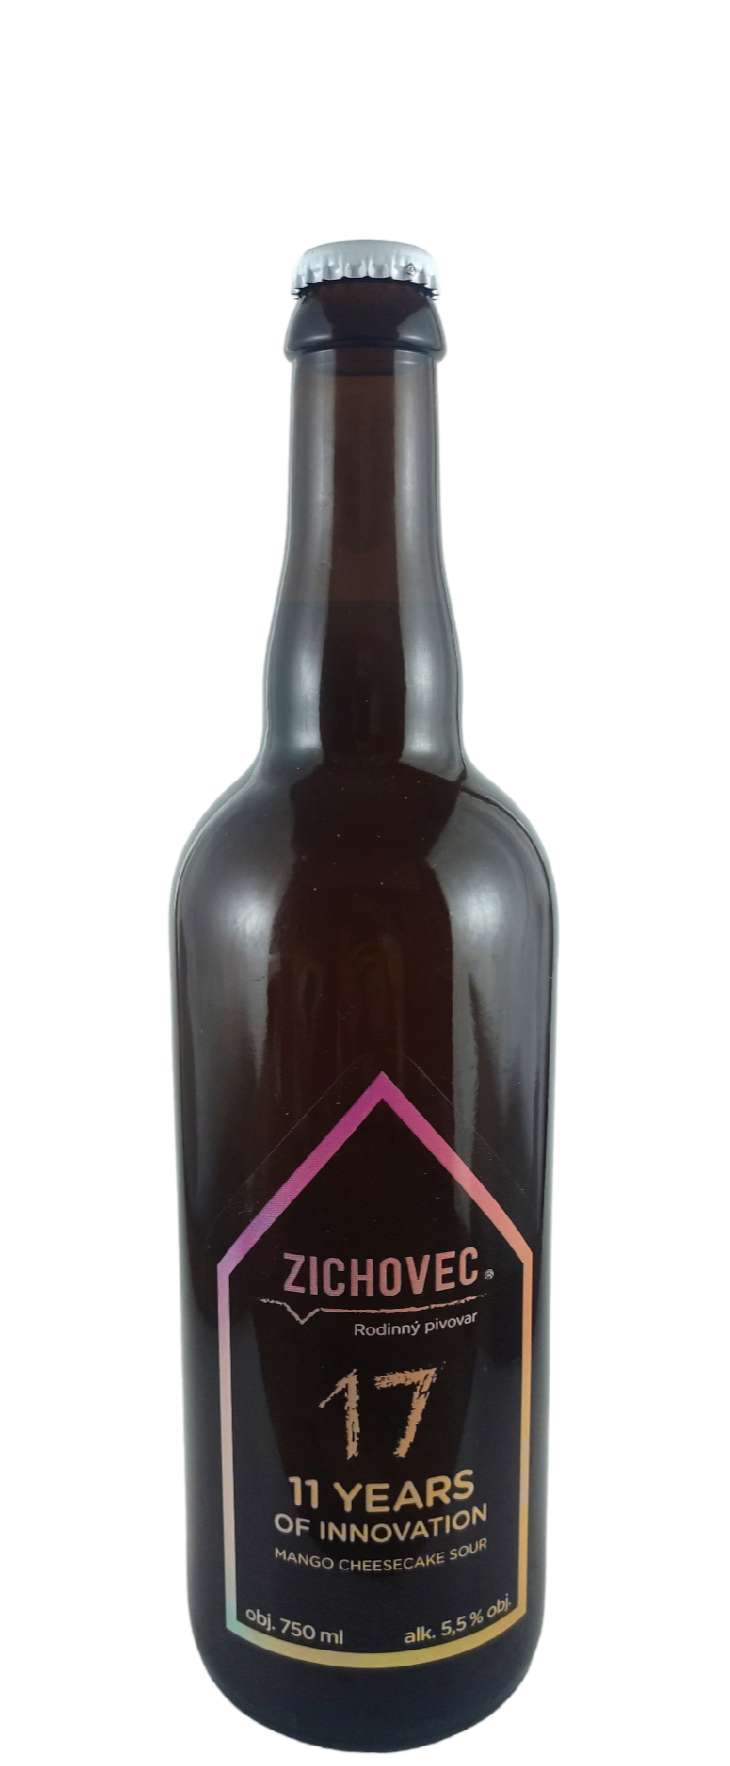 Zichovec 11 Years of Innovation Mango Cheesecake Sour ALE 17°